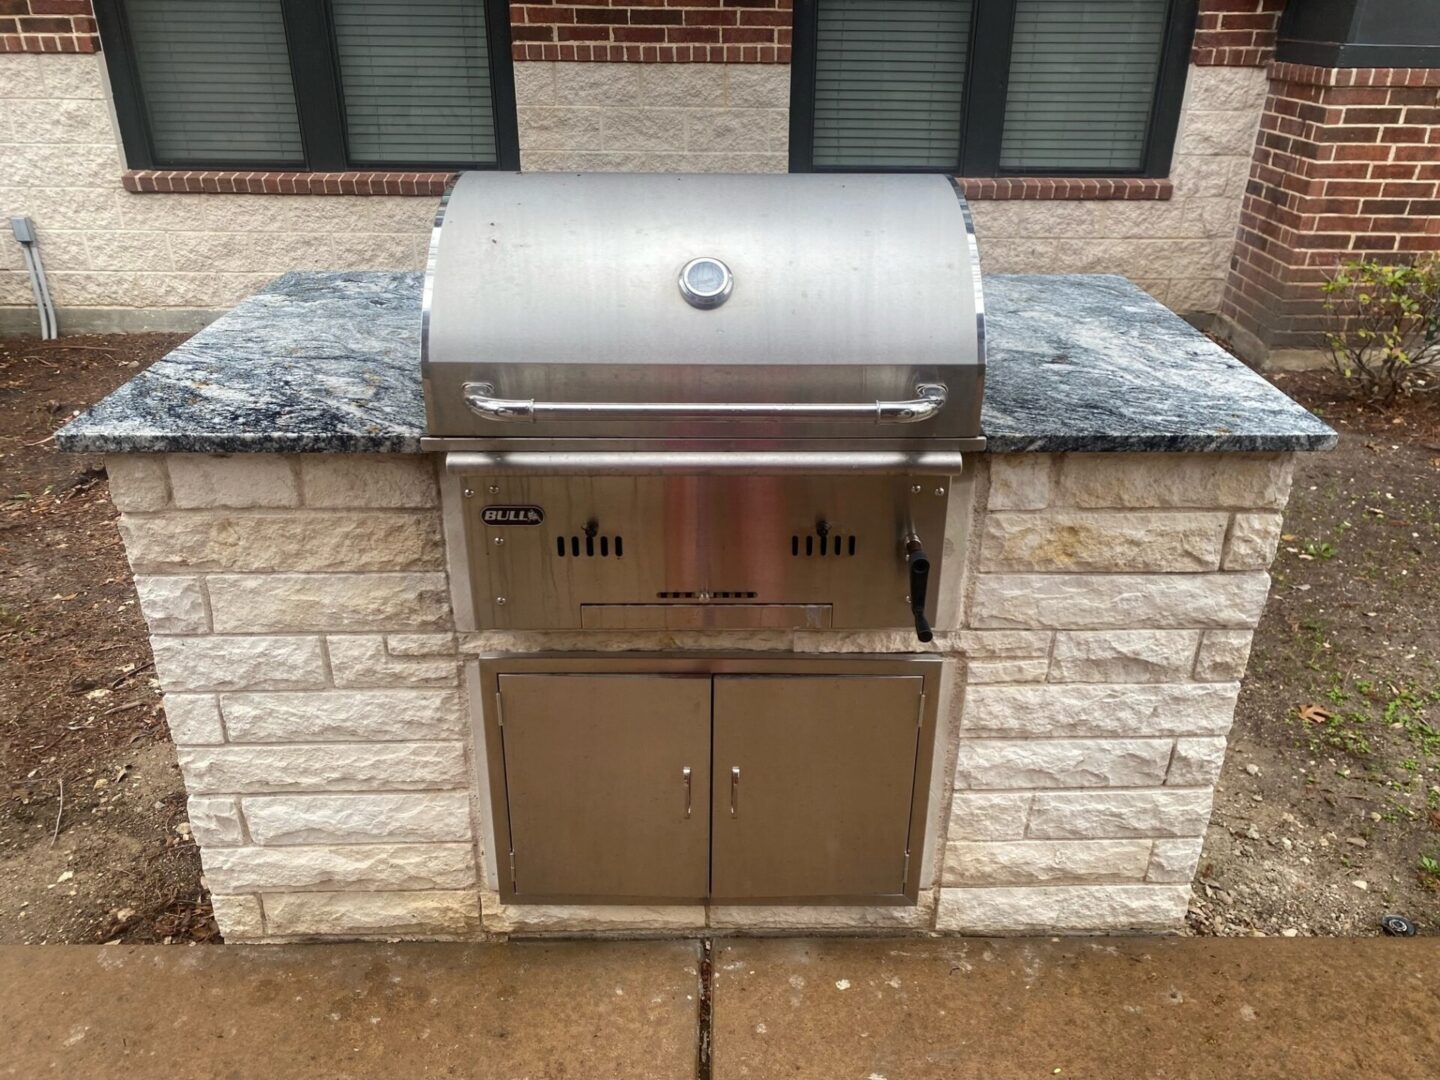 A grill sitting on top of a brick wall.